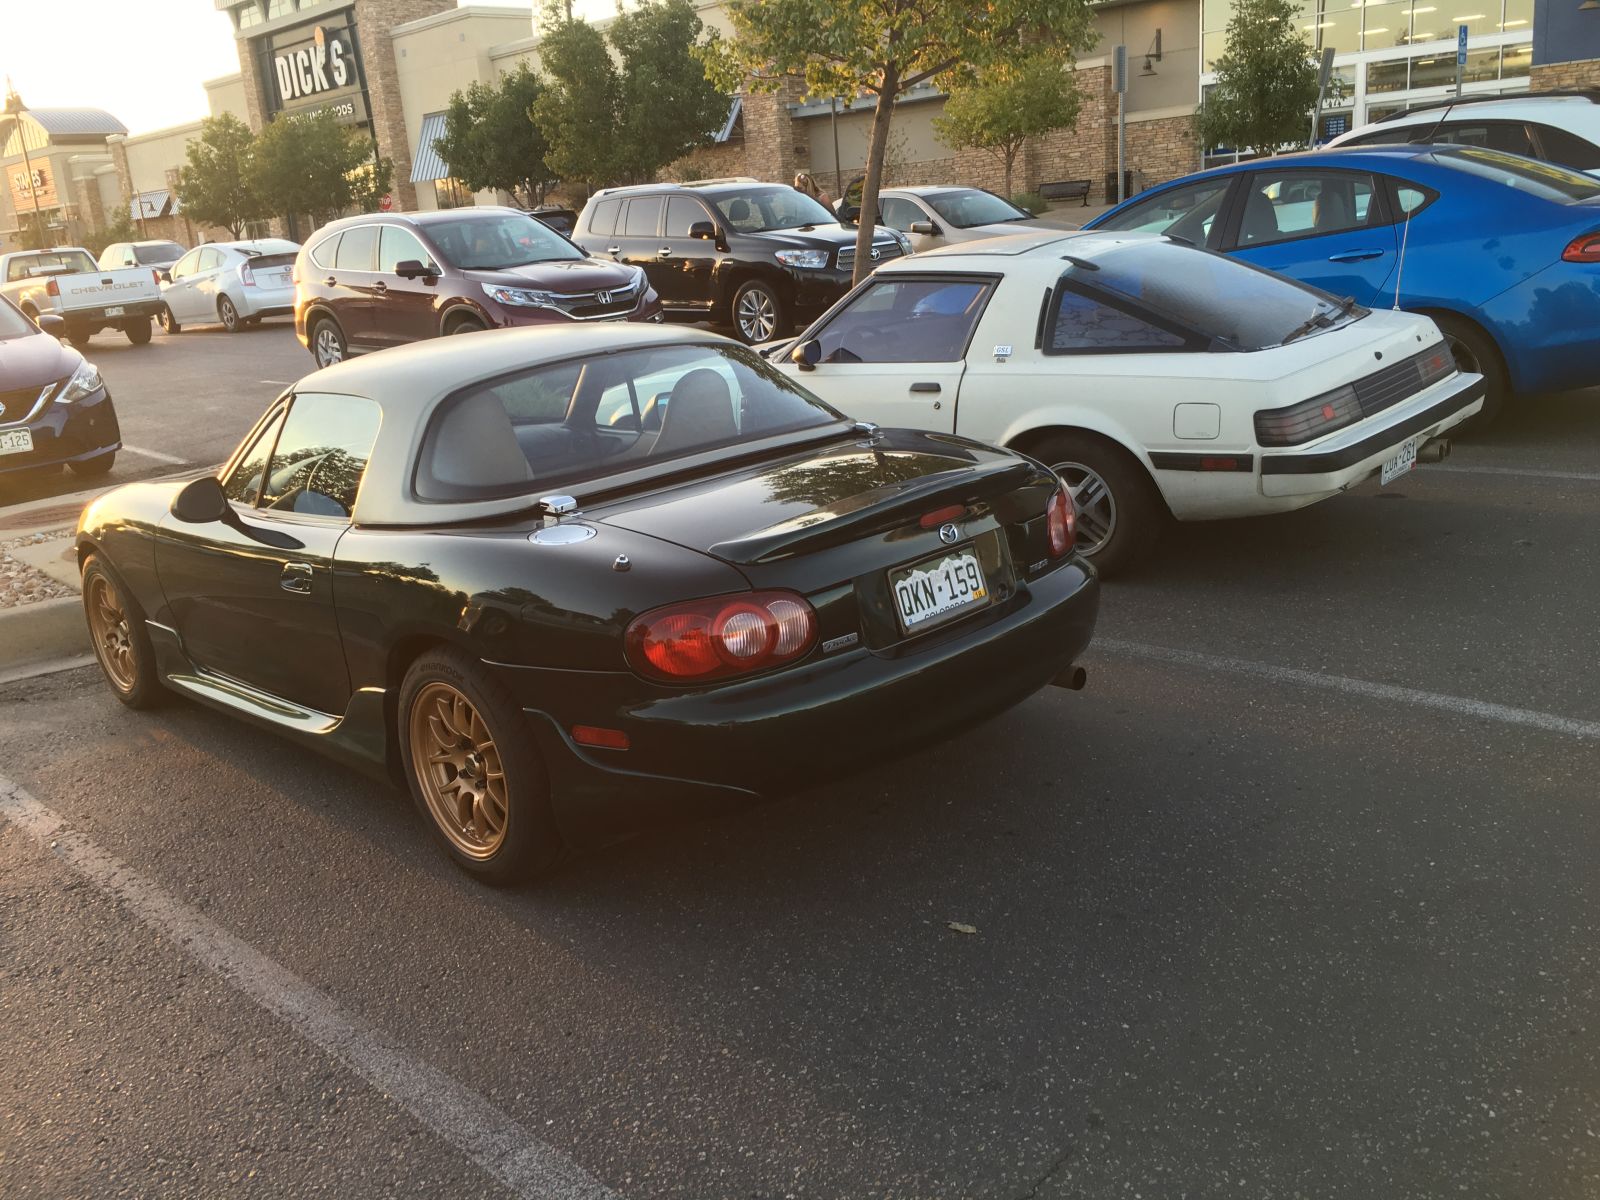 My green &amp; gold Miata found a parking pal at Best Buy.